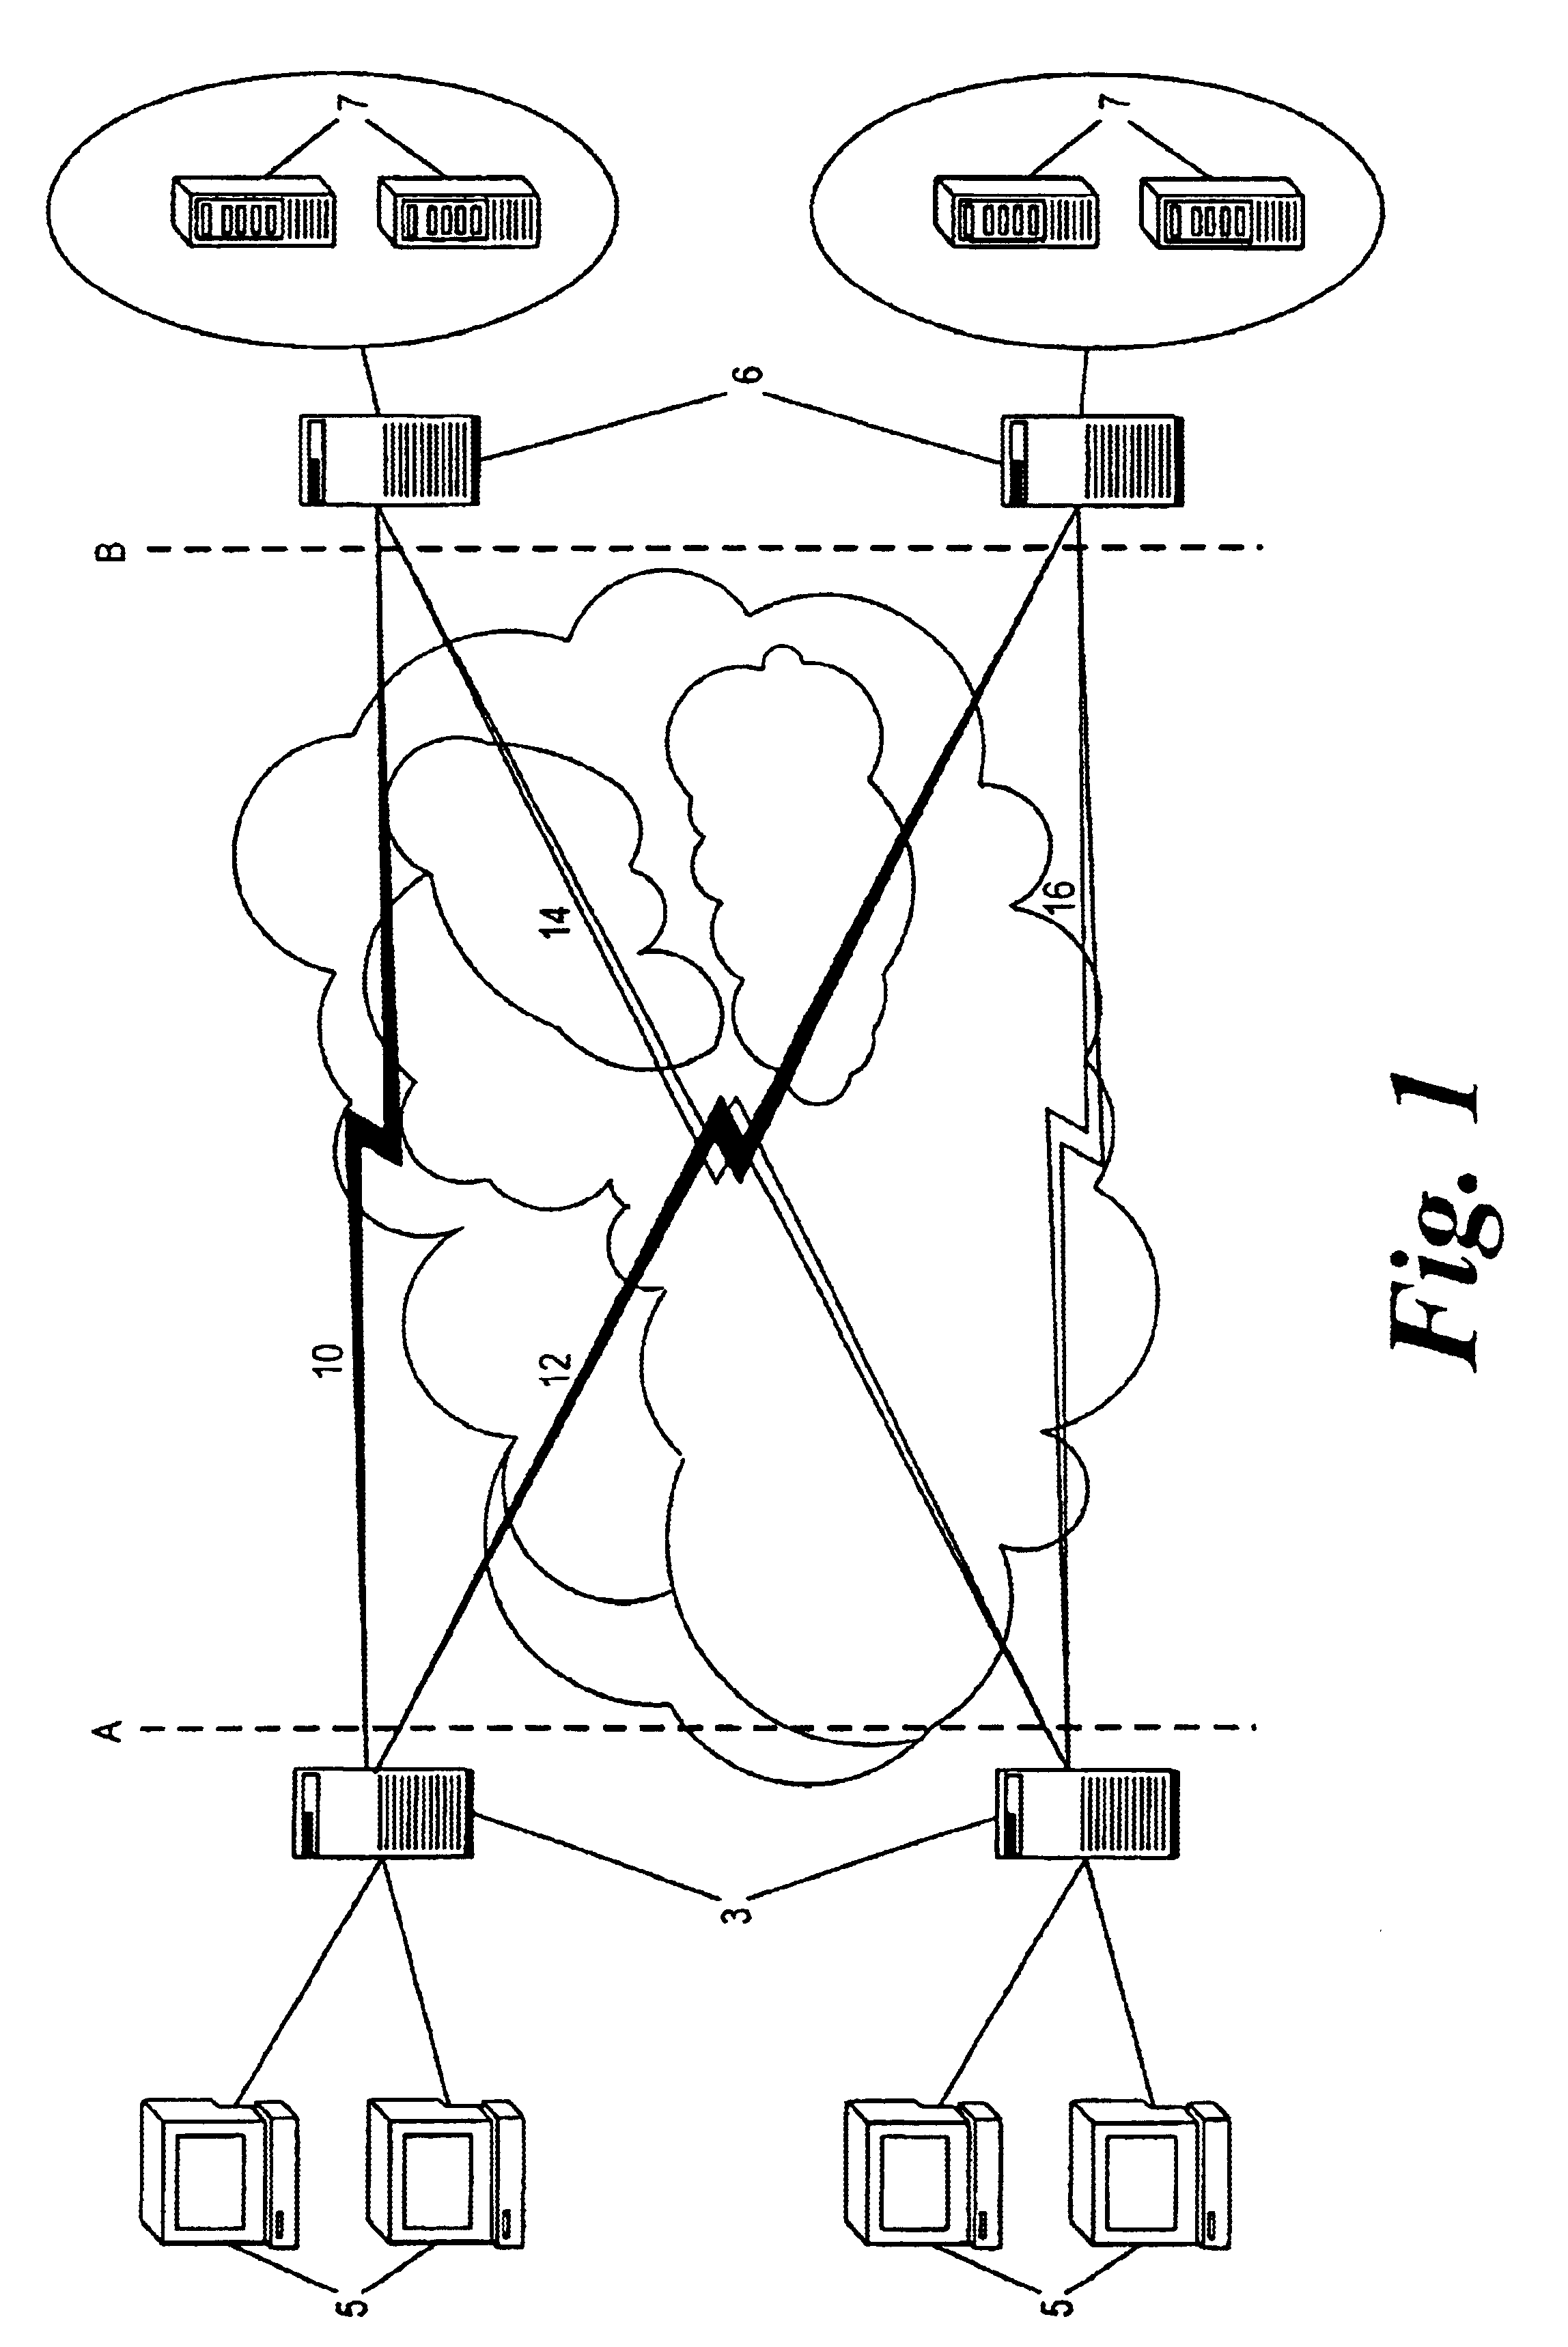 Method and apparatus for optimizing network service